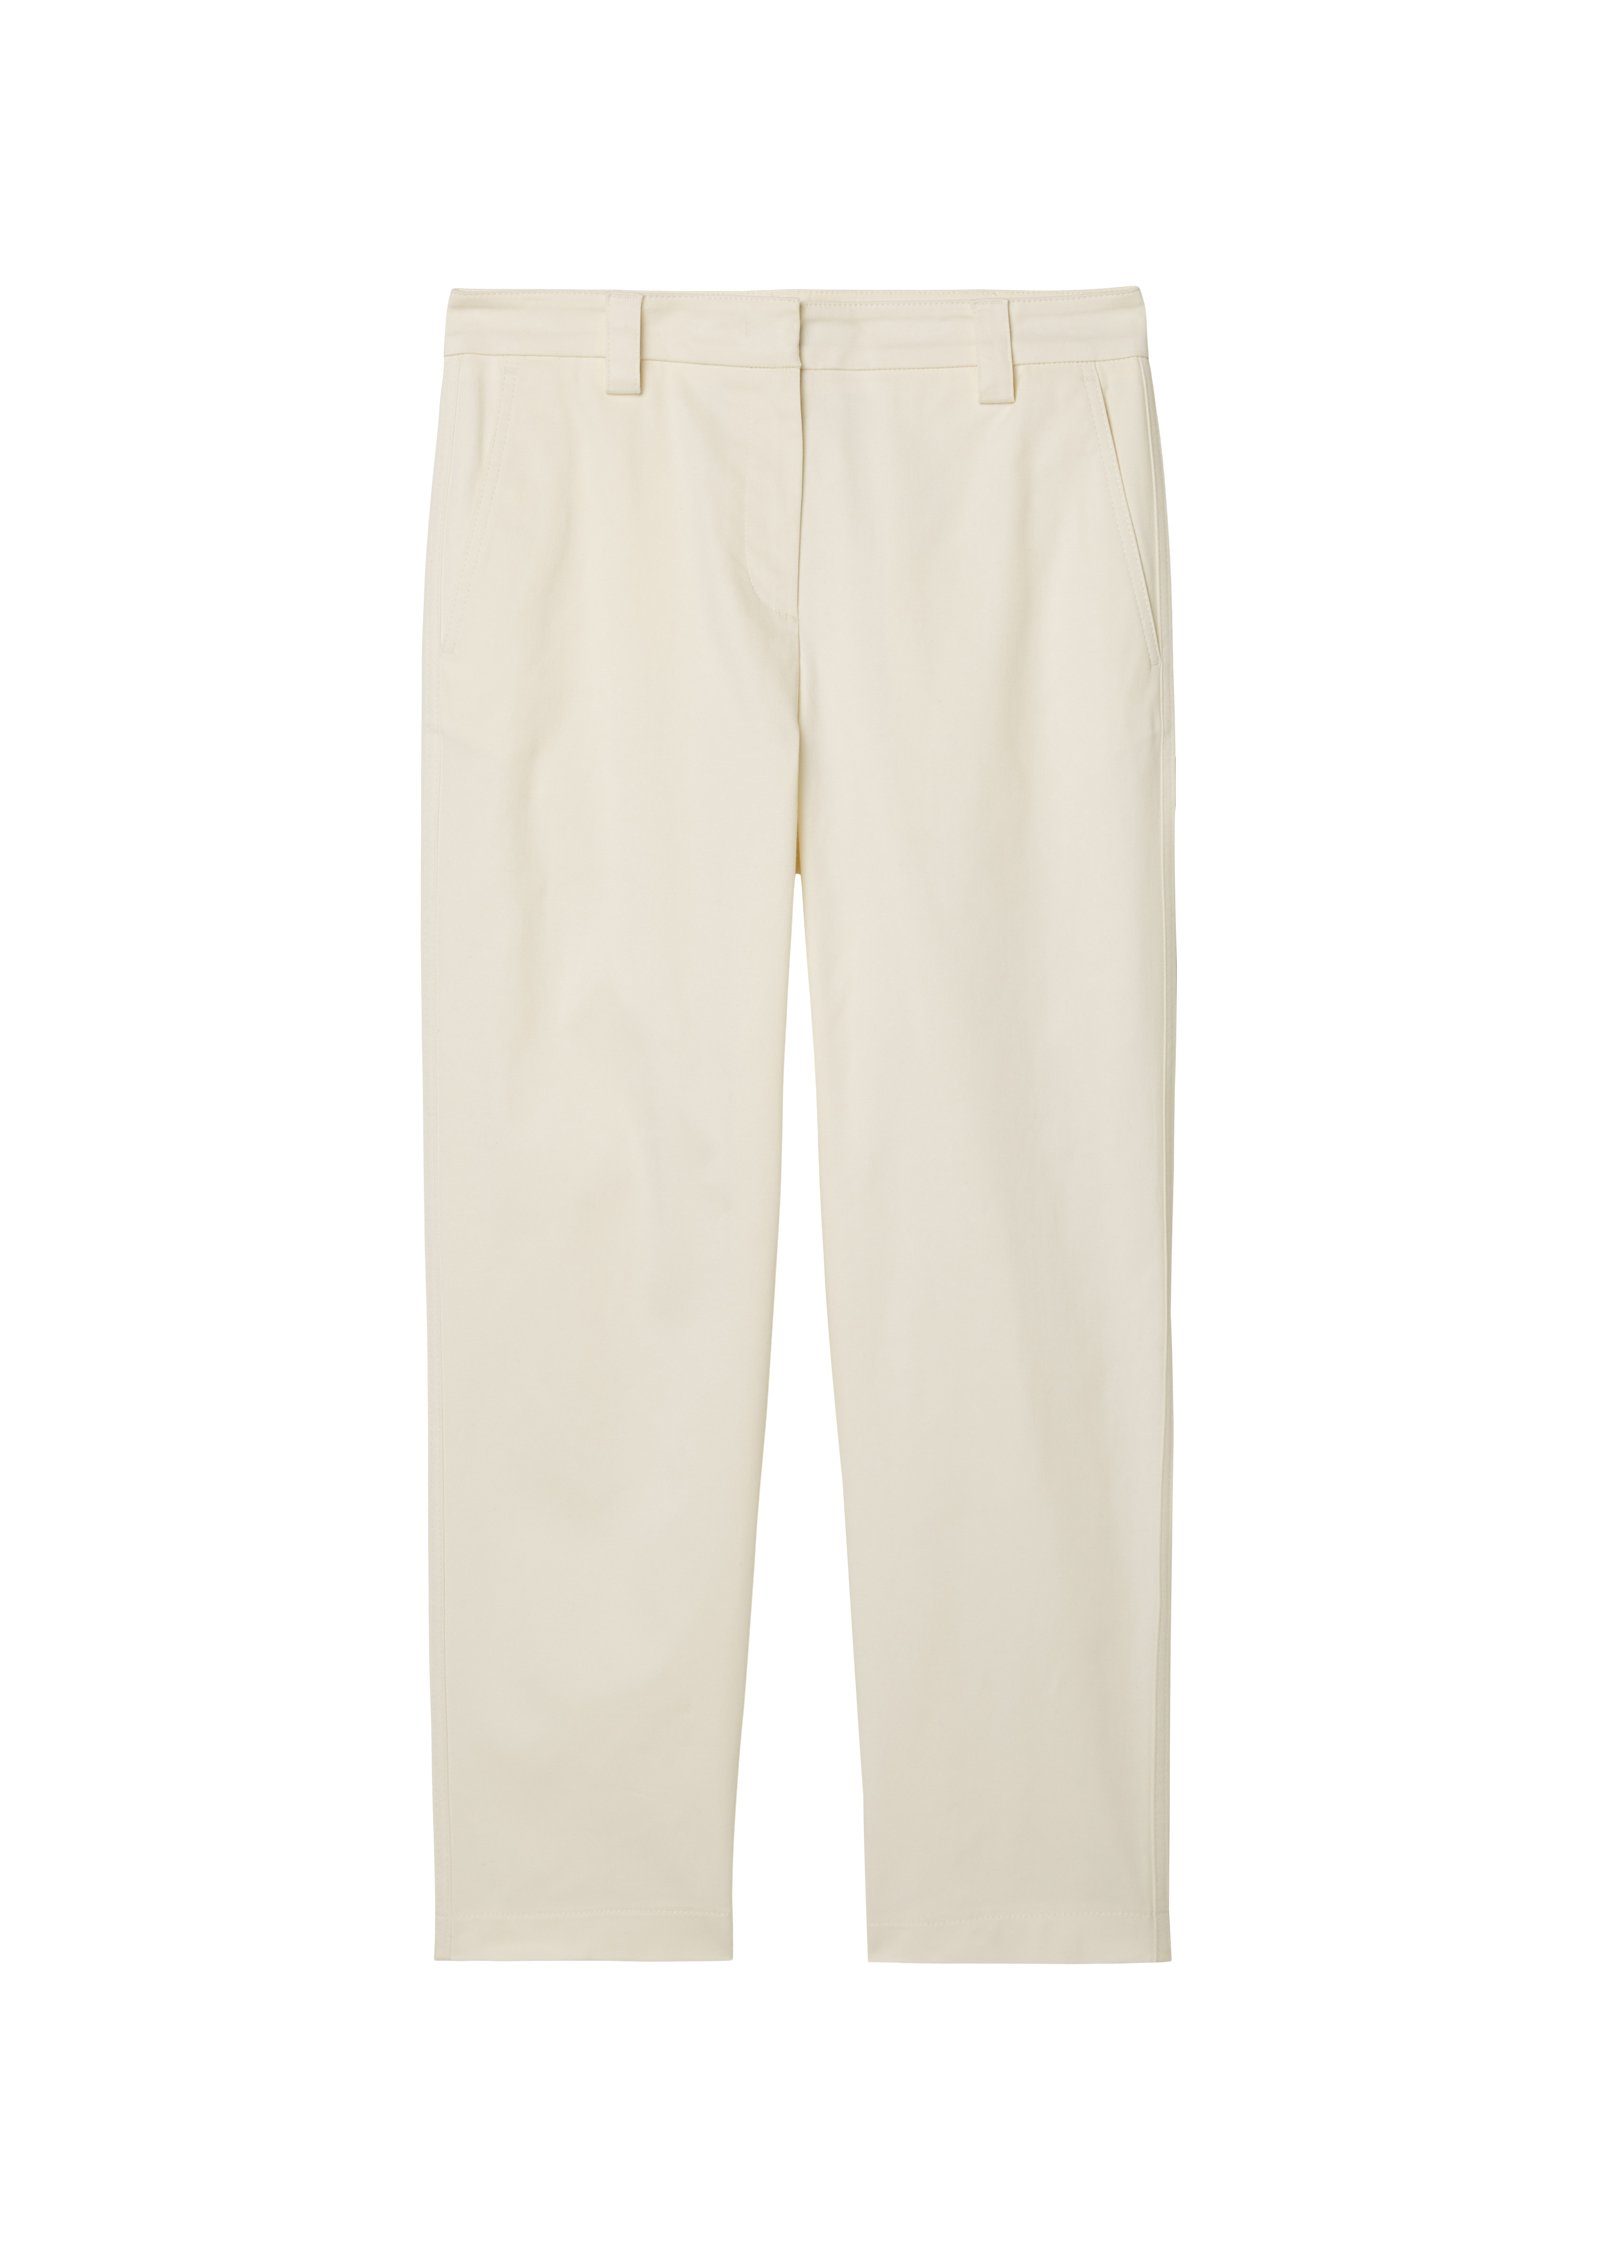 welt pocket modernen Pants, im O'Polo leg, 7/8-Hose chalky style, Chino-Style modern high rise, sand chino tapered Marc